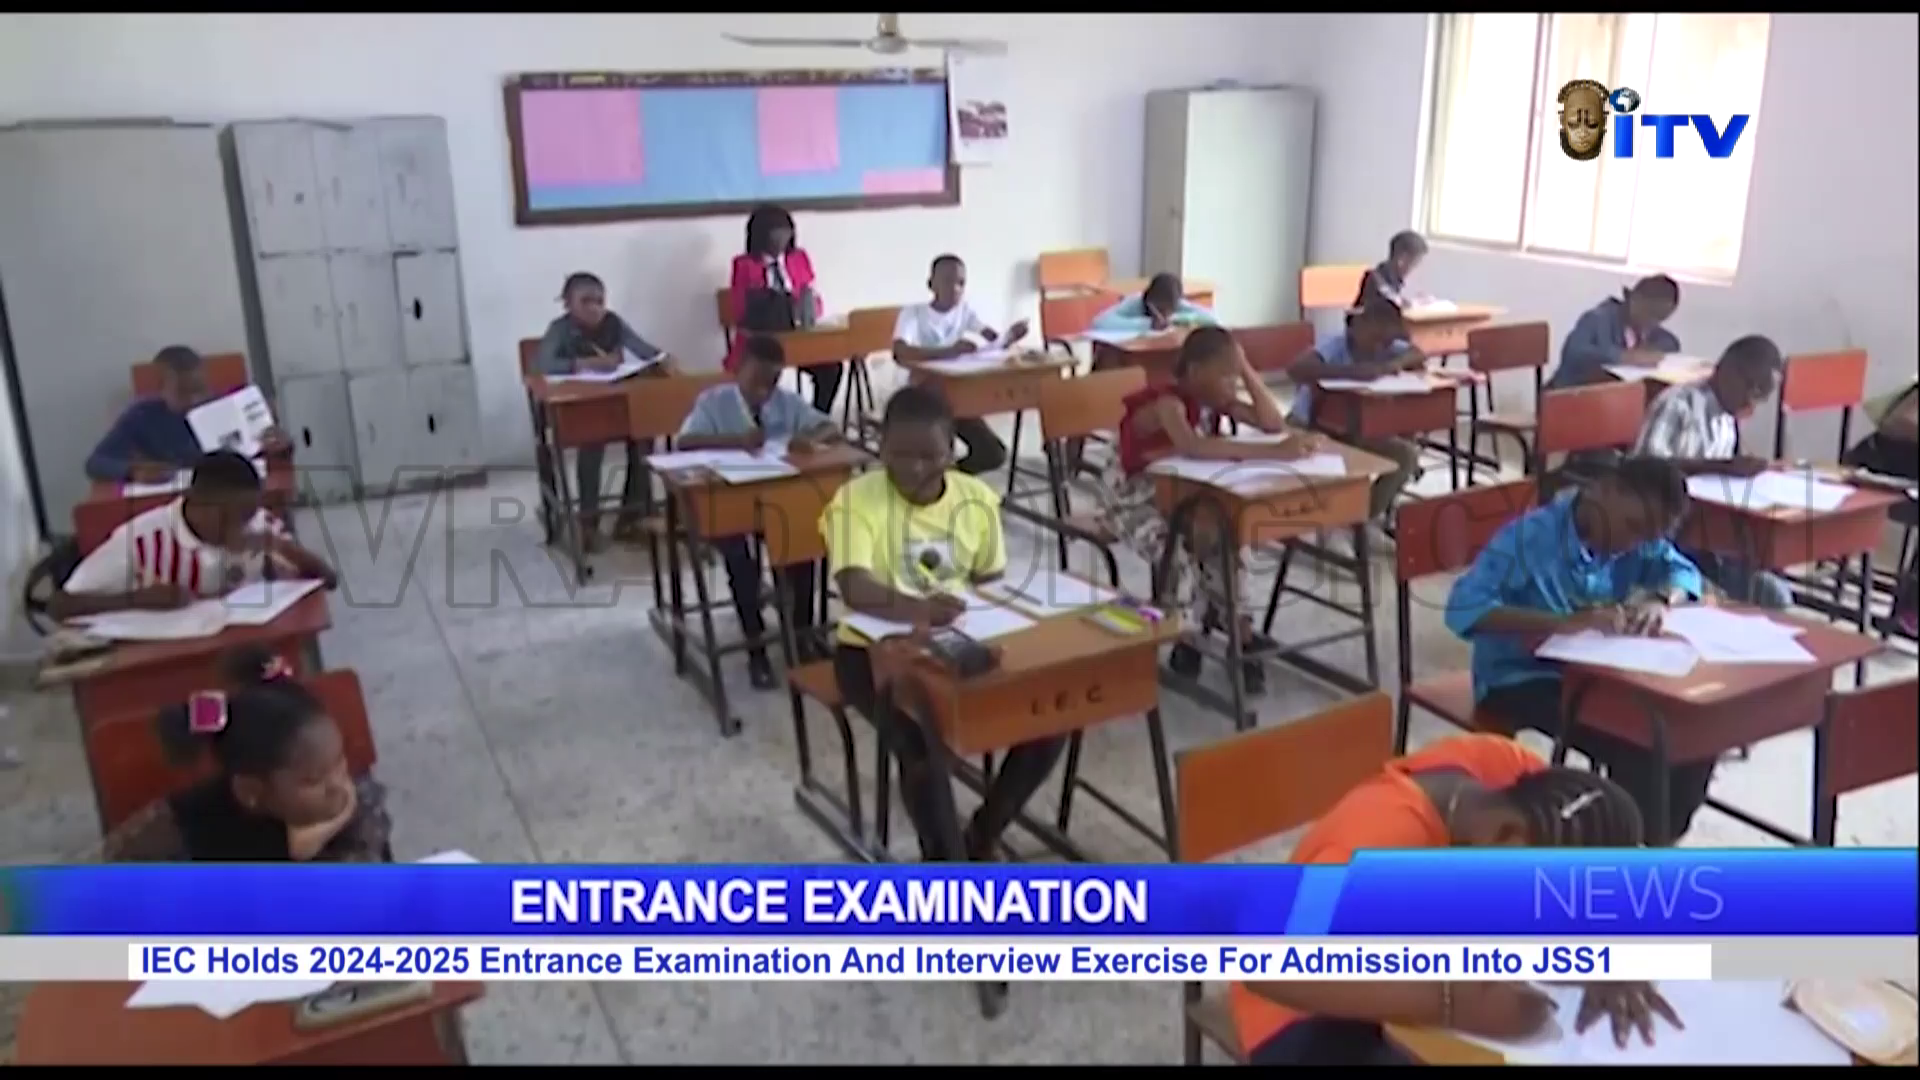 IEC Holds 2024-2025 Entrance Examination And Interview Exercise For Admission Into JSS1